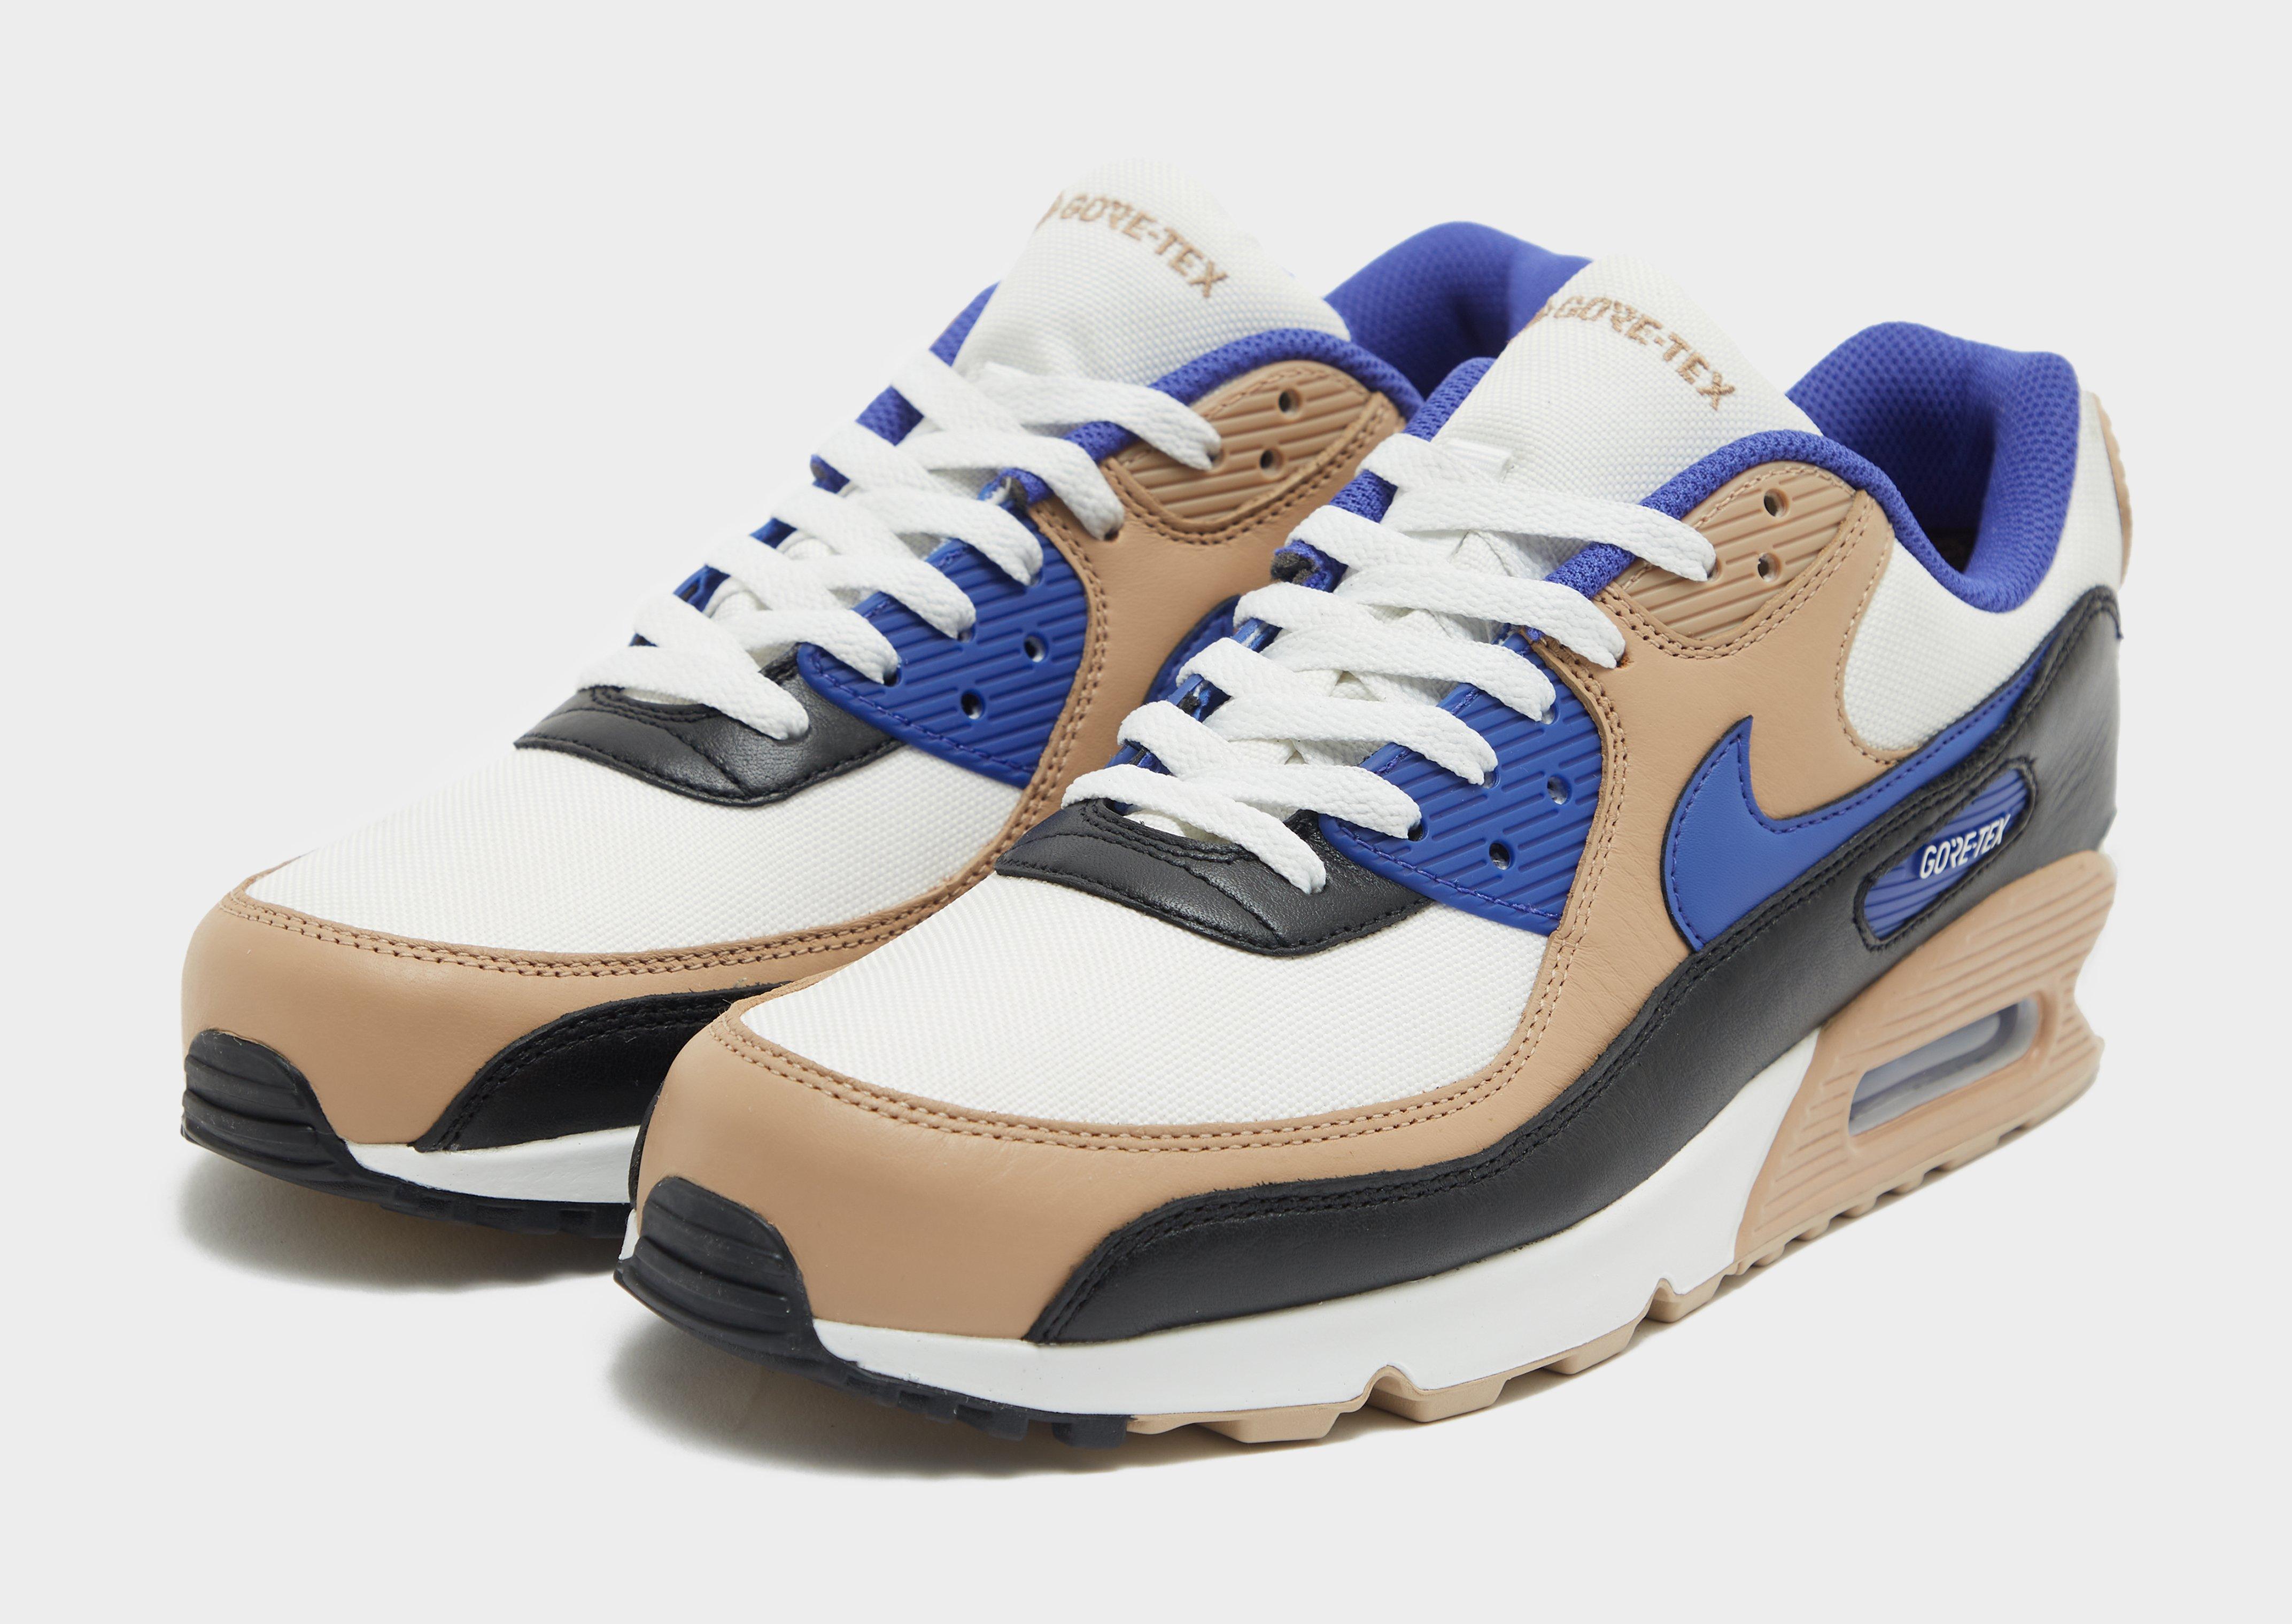 Nike Air Max 90 GORE-TEX Release Date and Info